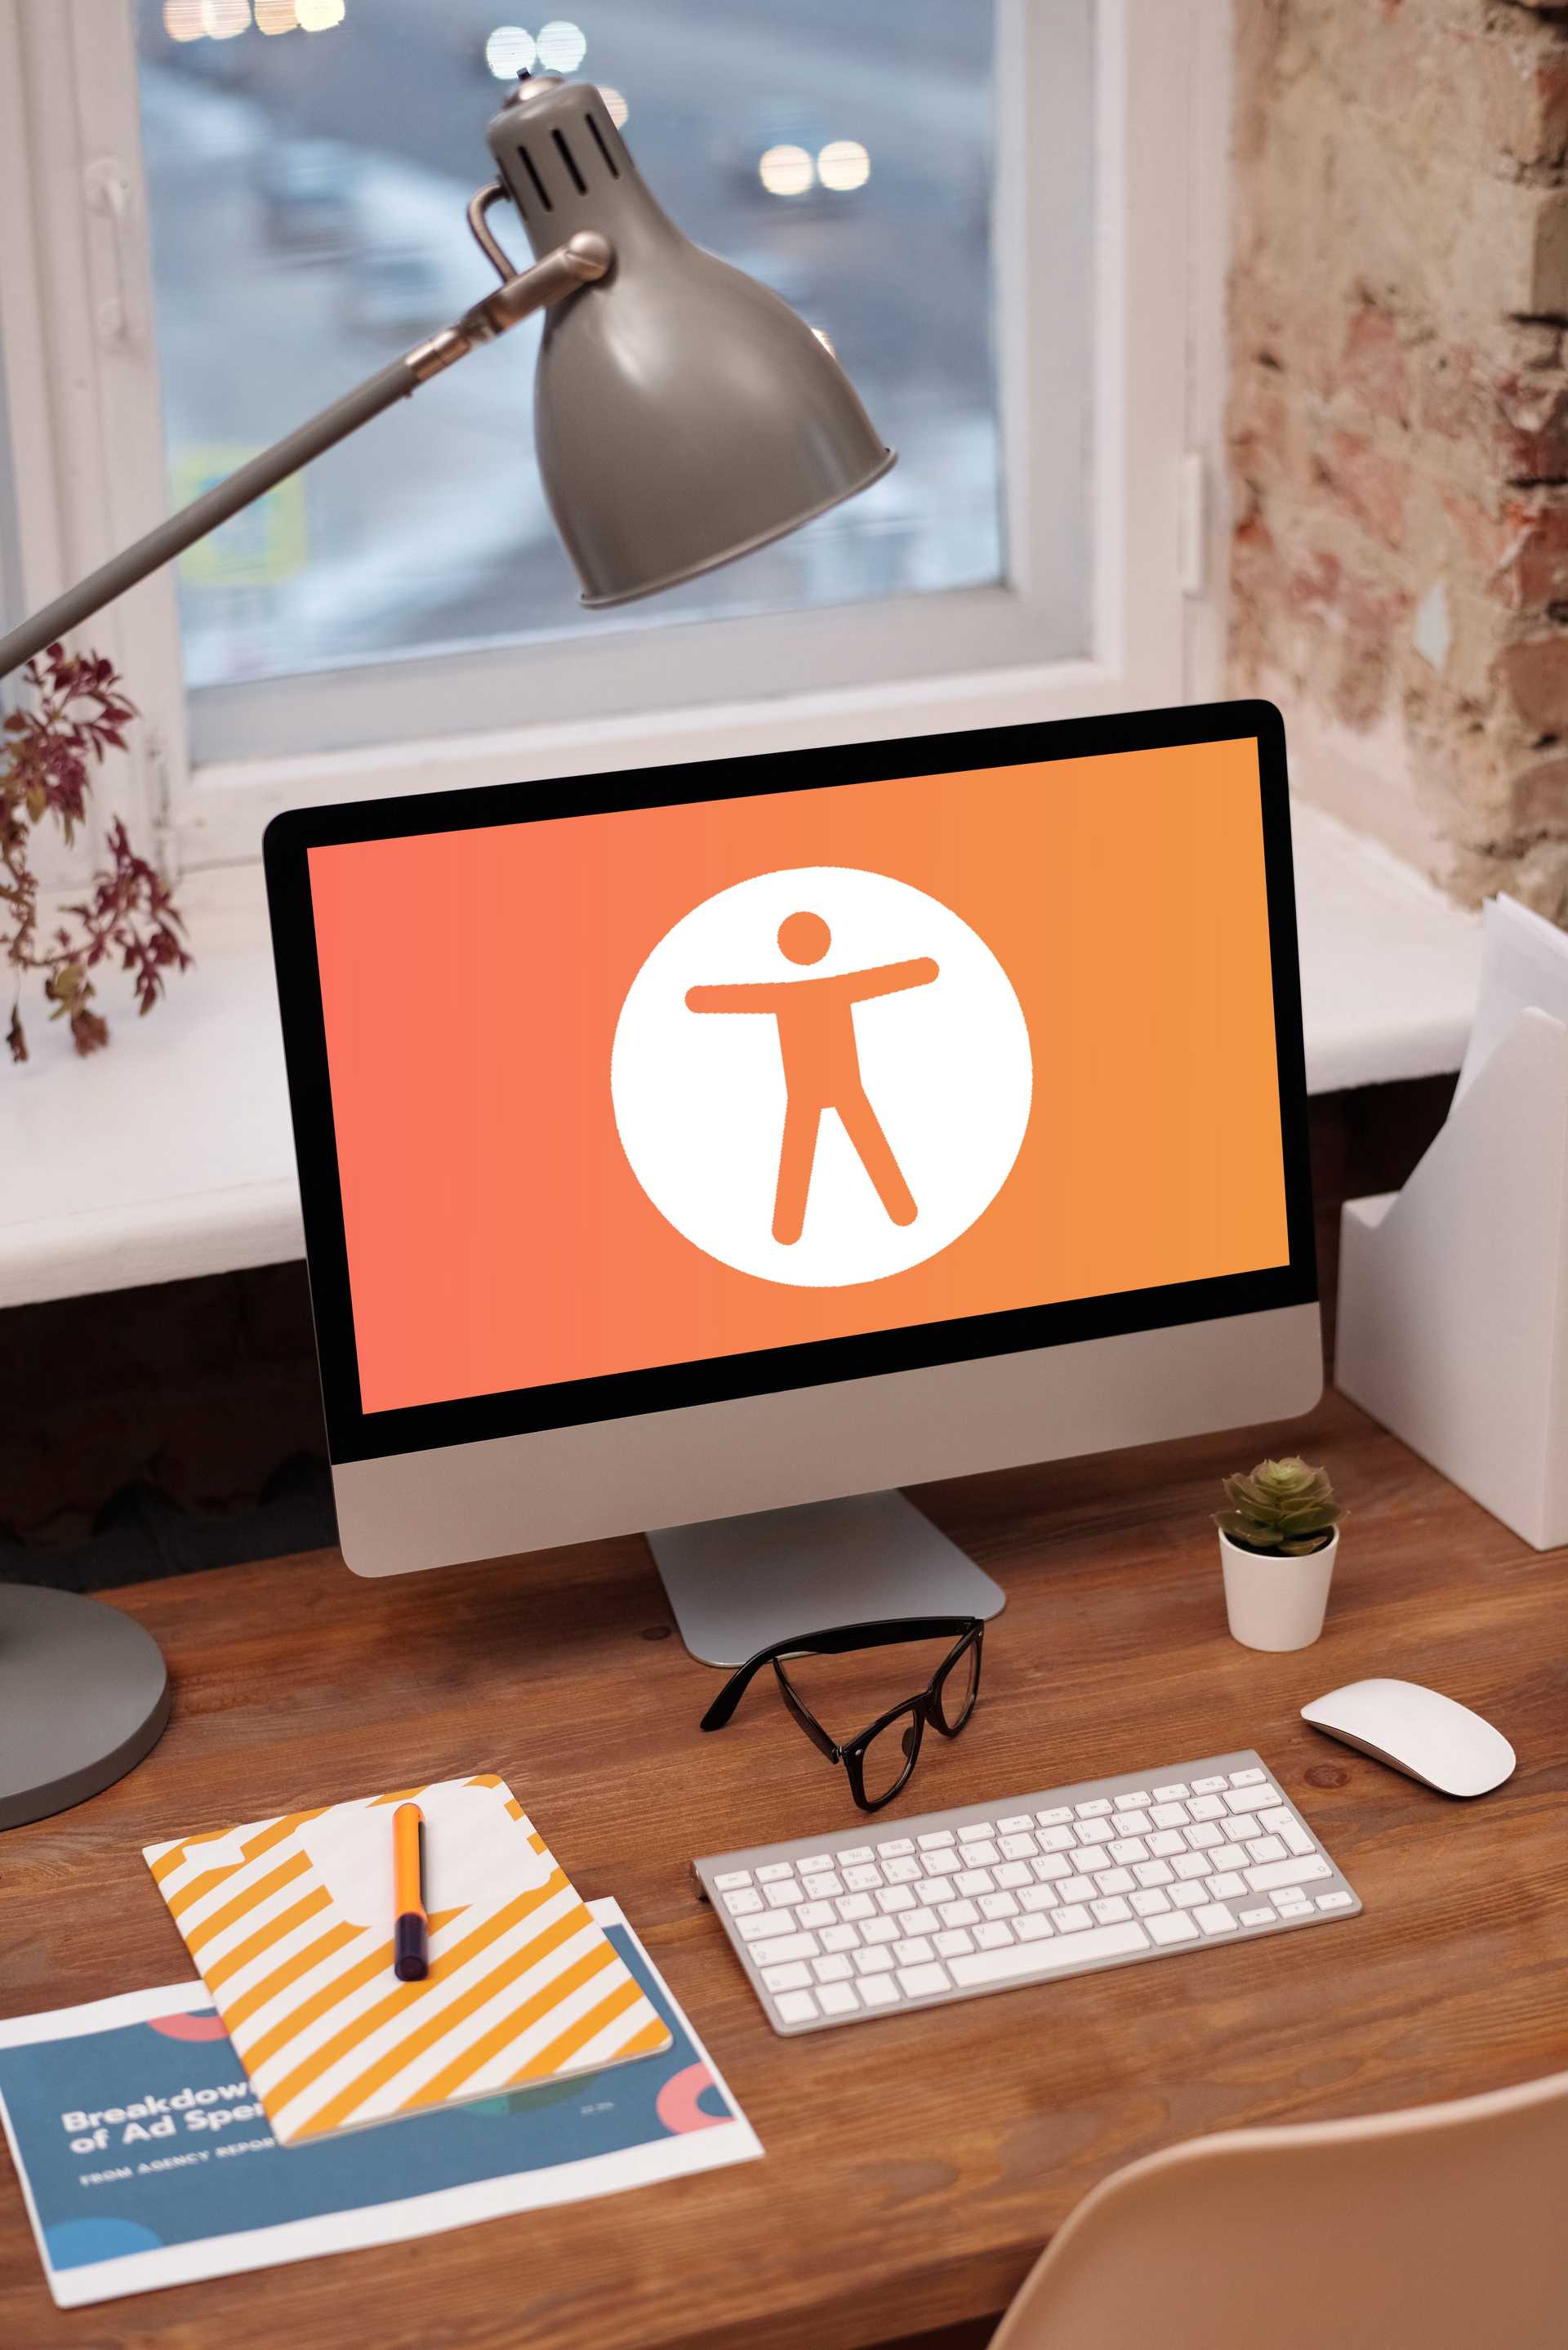 Computer monitor on desk showing orange and white human stick figure